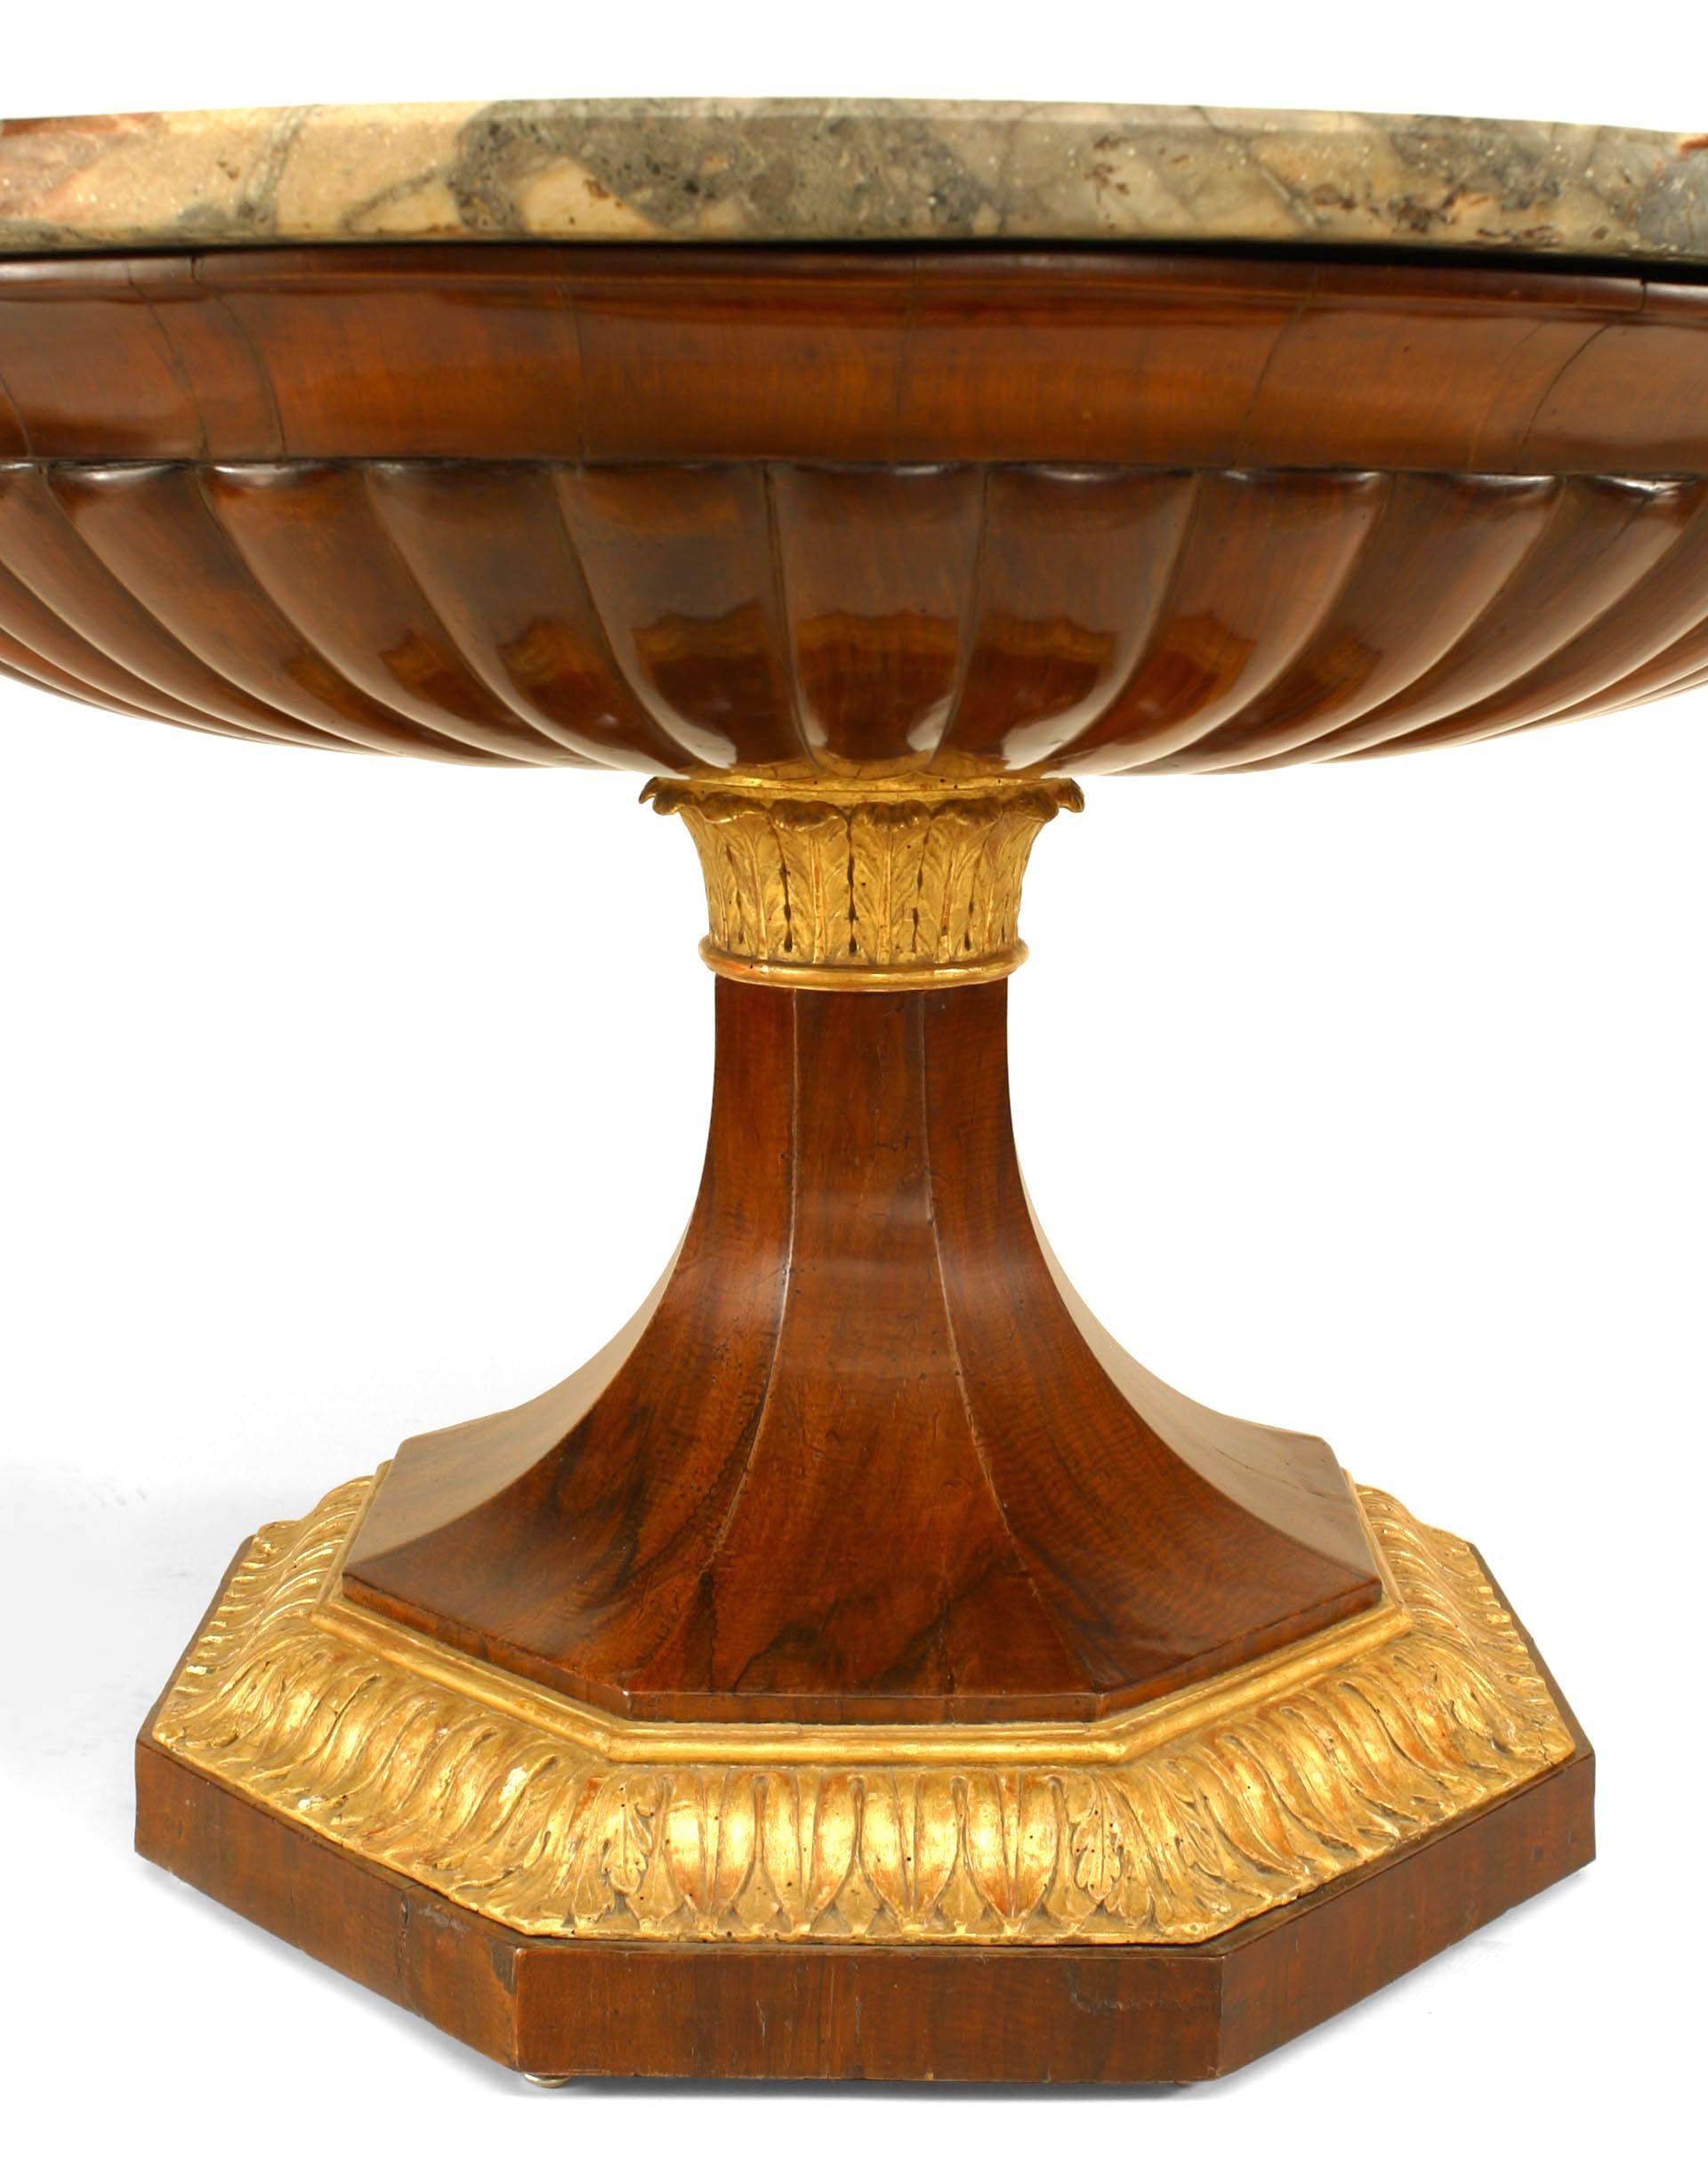 19th Century Italian Neapolitan Neo-Classic Walnut Center Table with Marble Top For Sale